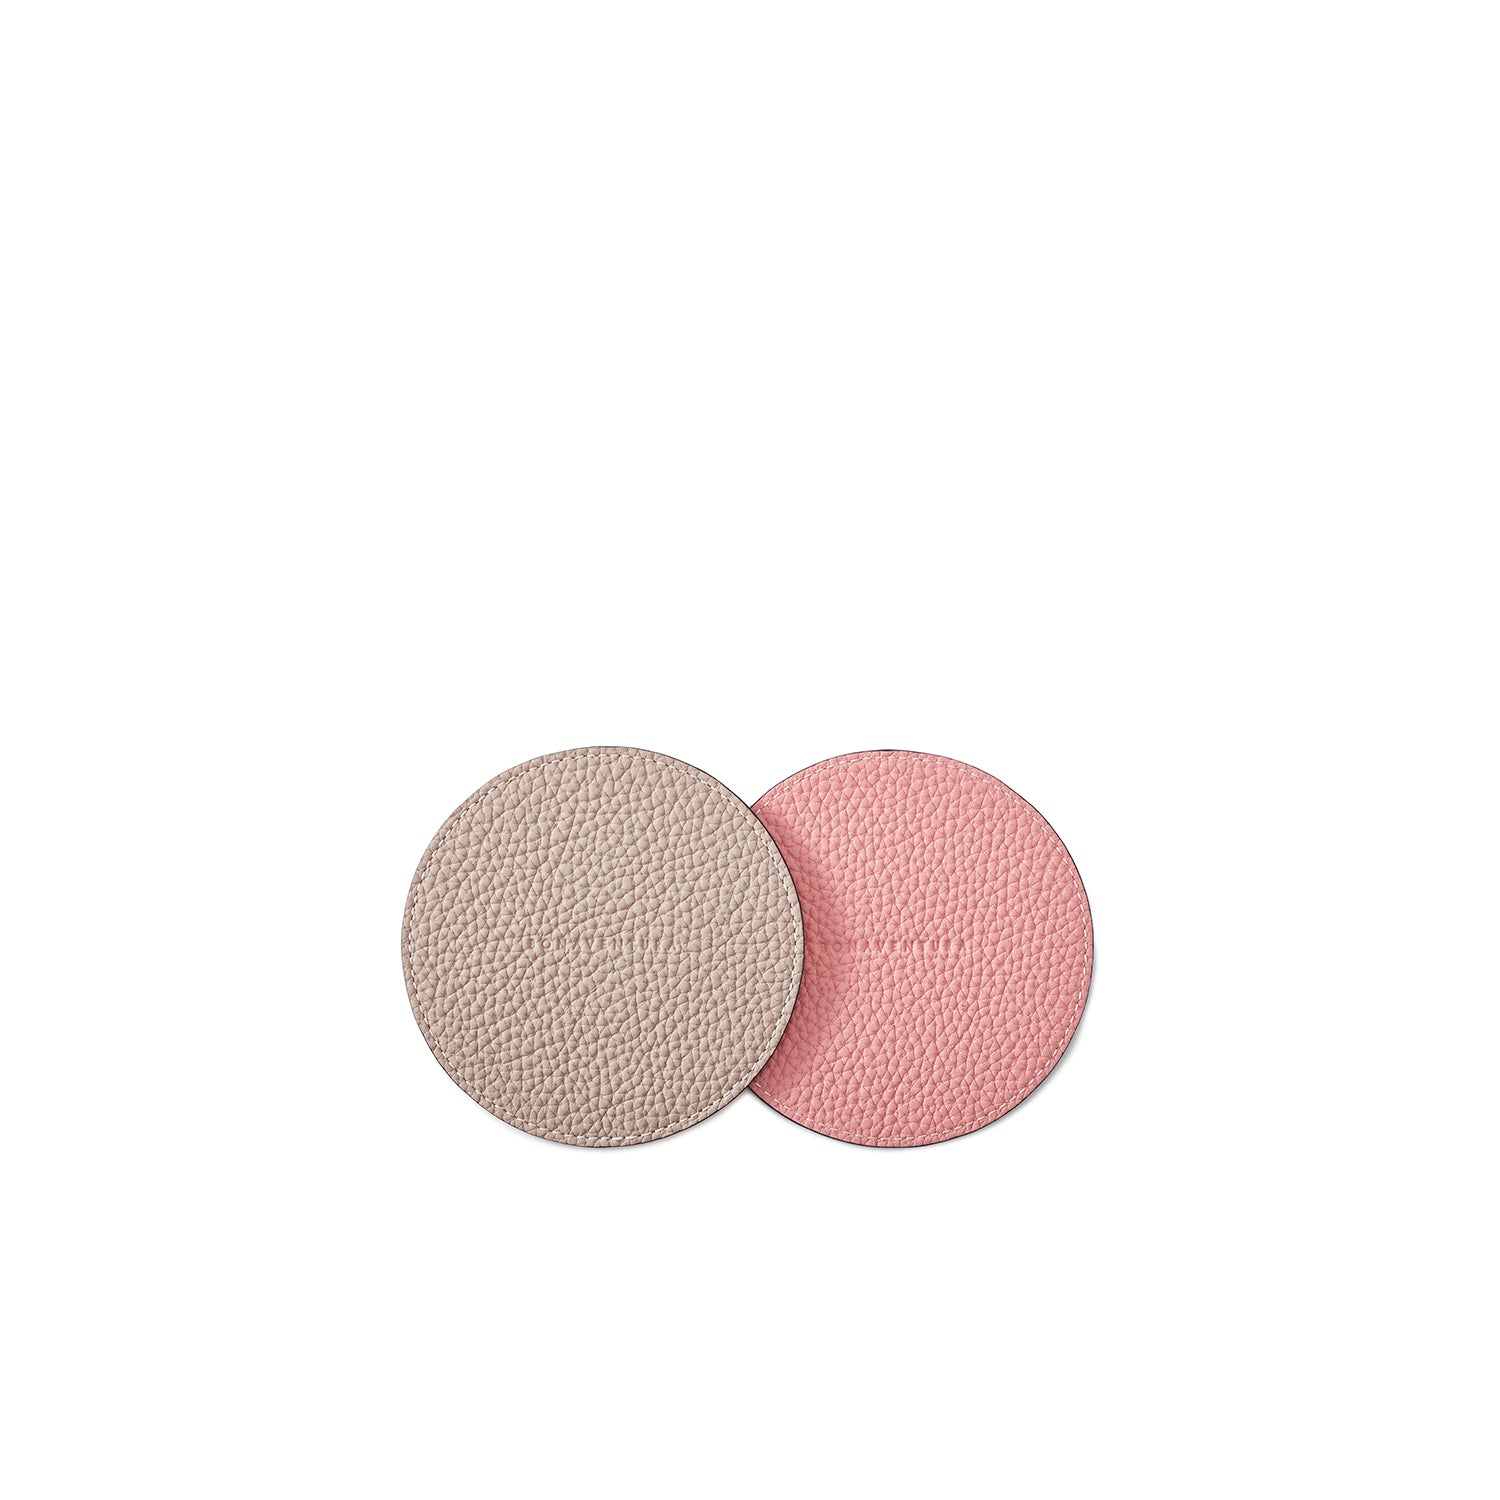 Set of 2 reversible coasters (round) in shrunk leather